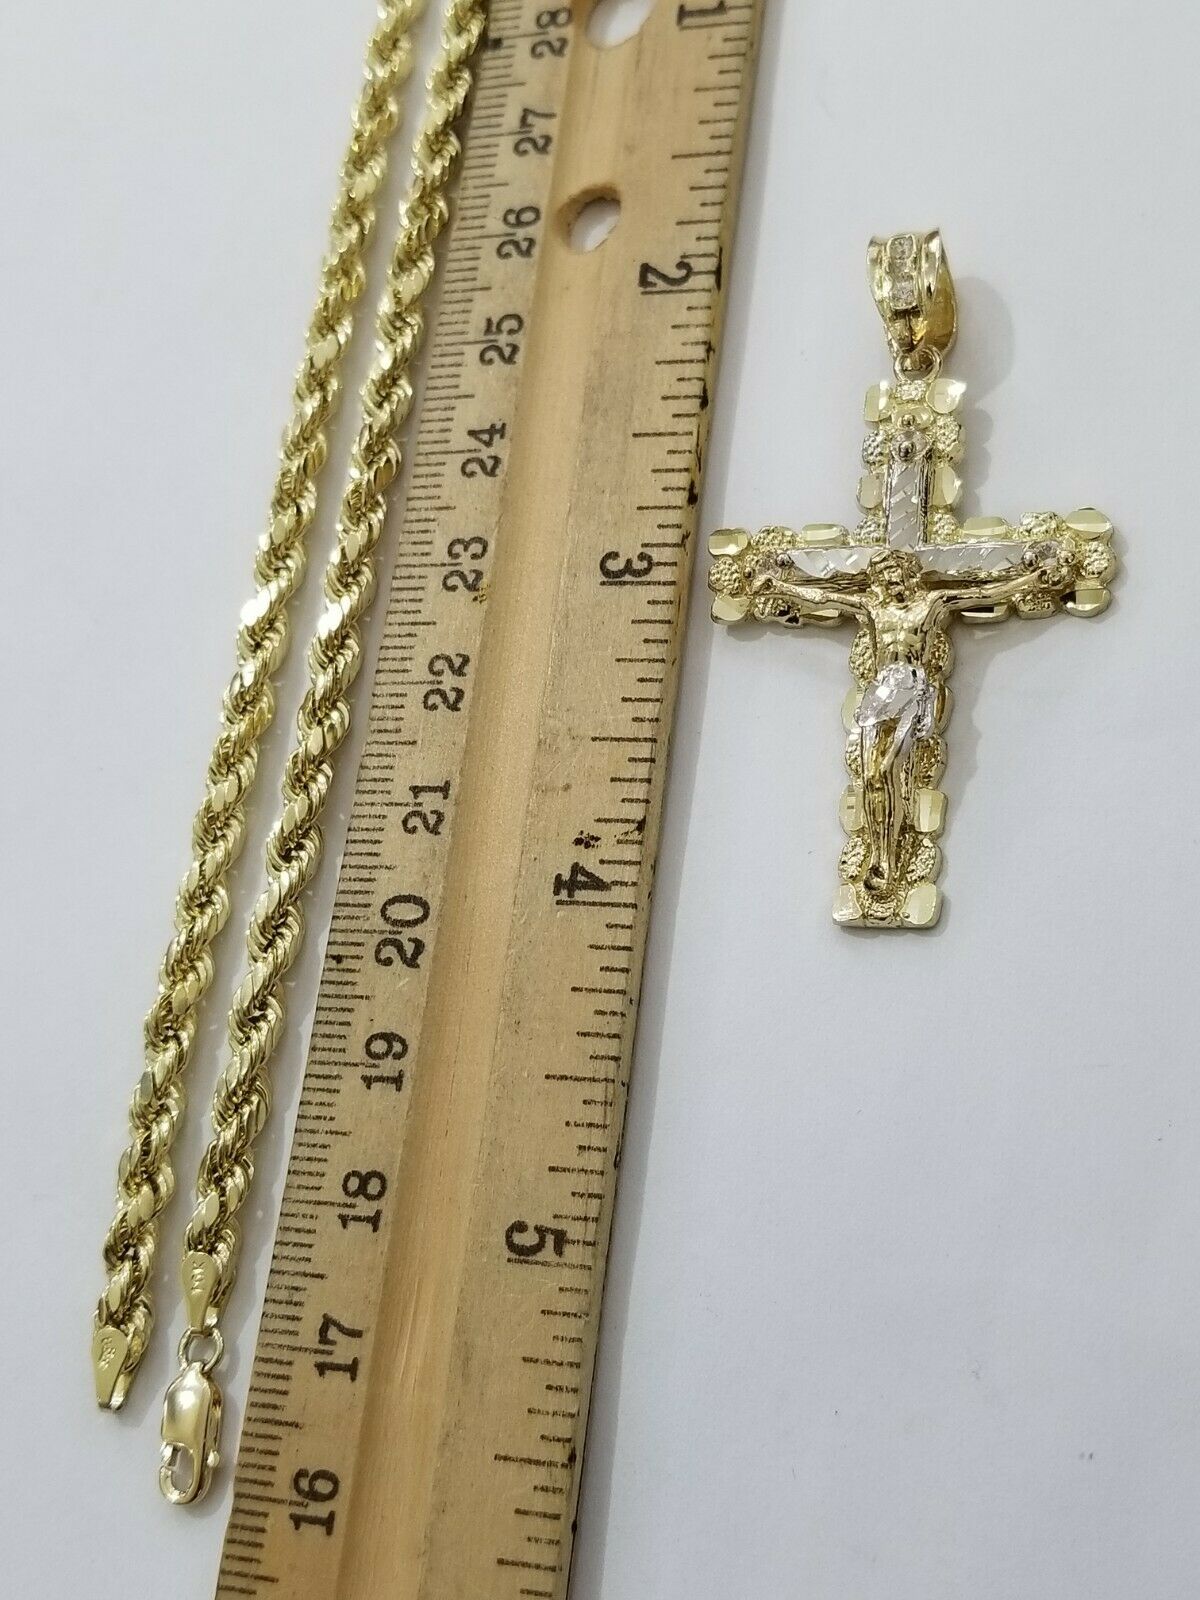 10k Yellow Gold Rope Chain With Cross Charm Pendant Set REAL 10KT 4mm Necklace